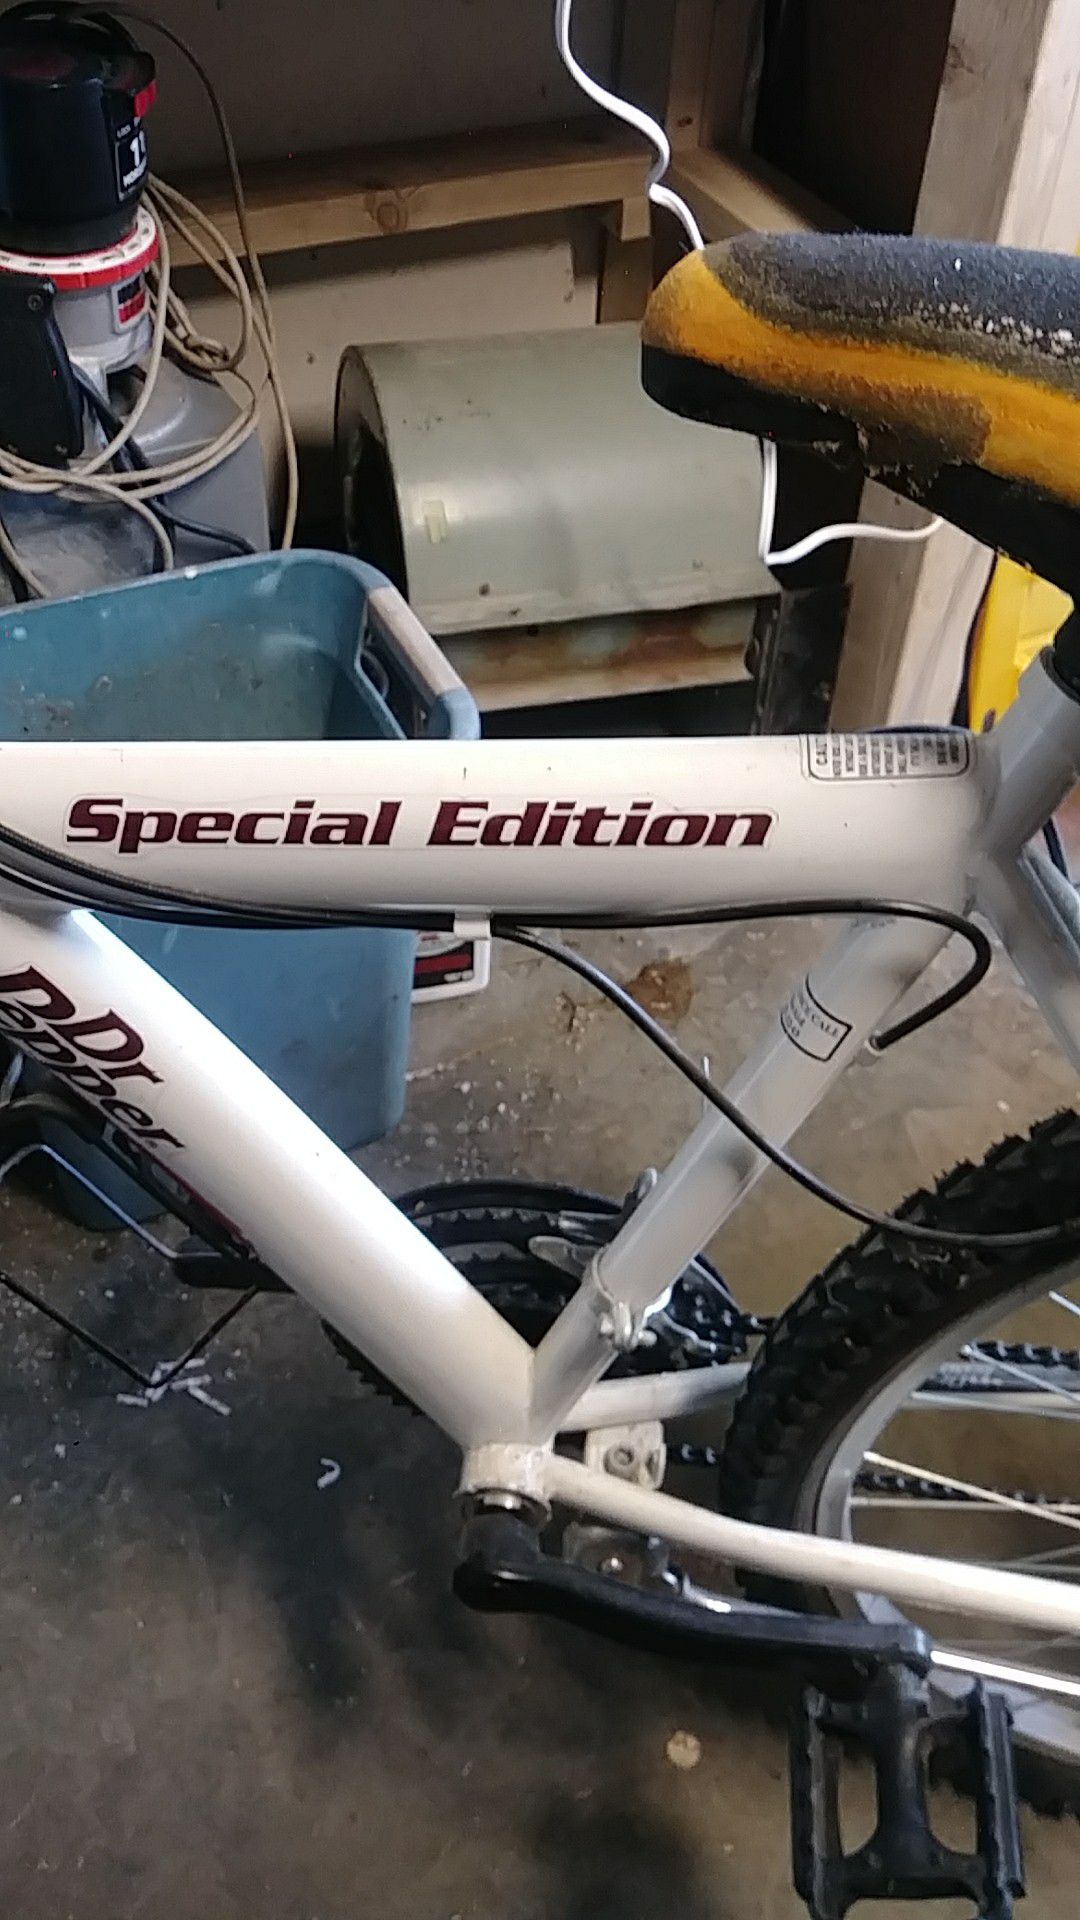 Dr Pepper Special Edition Mountain Bike